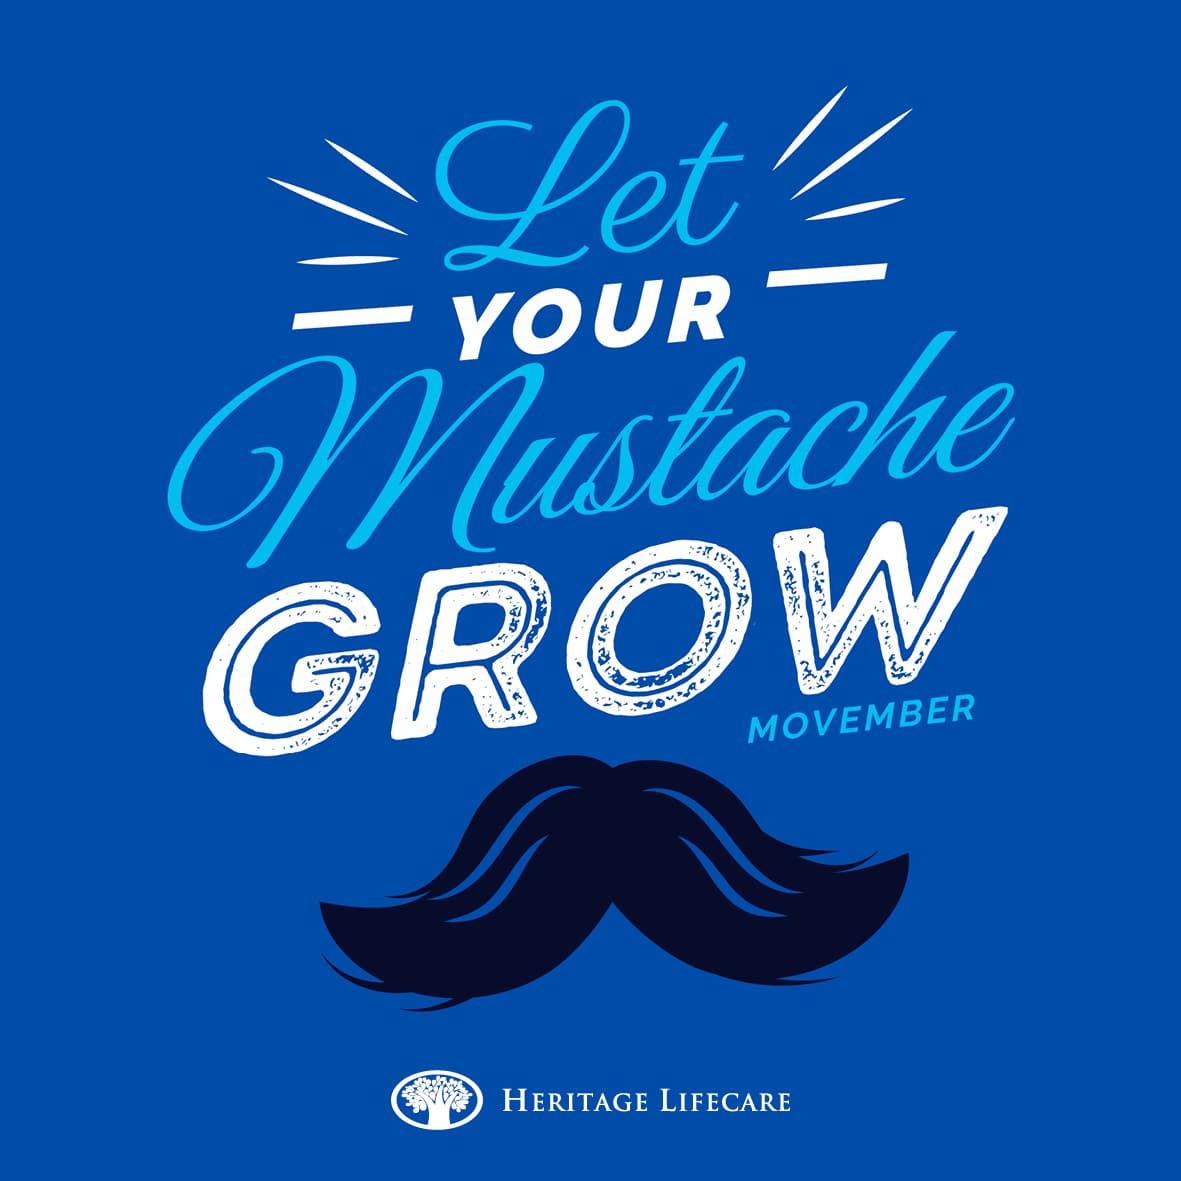 ​Show us your Mo!